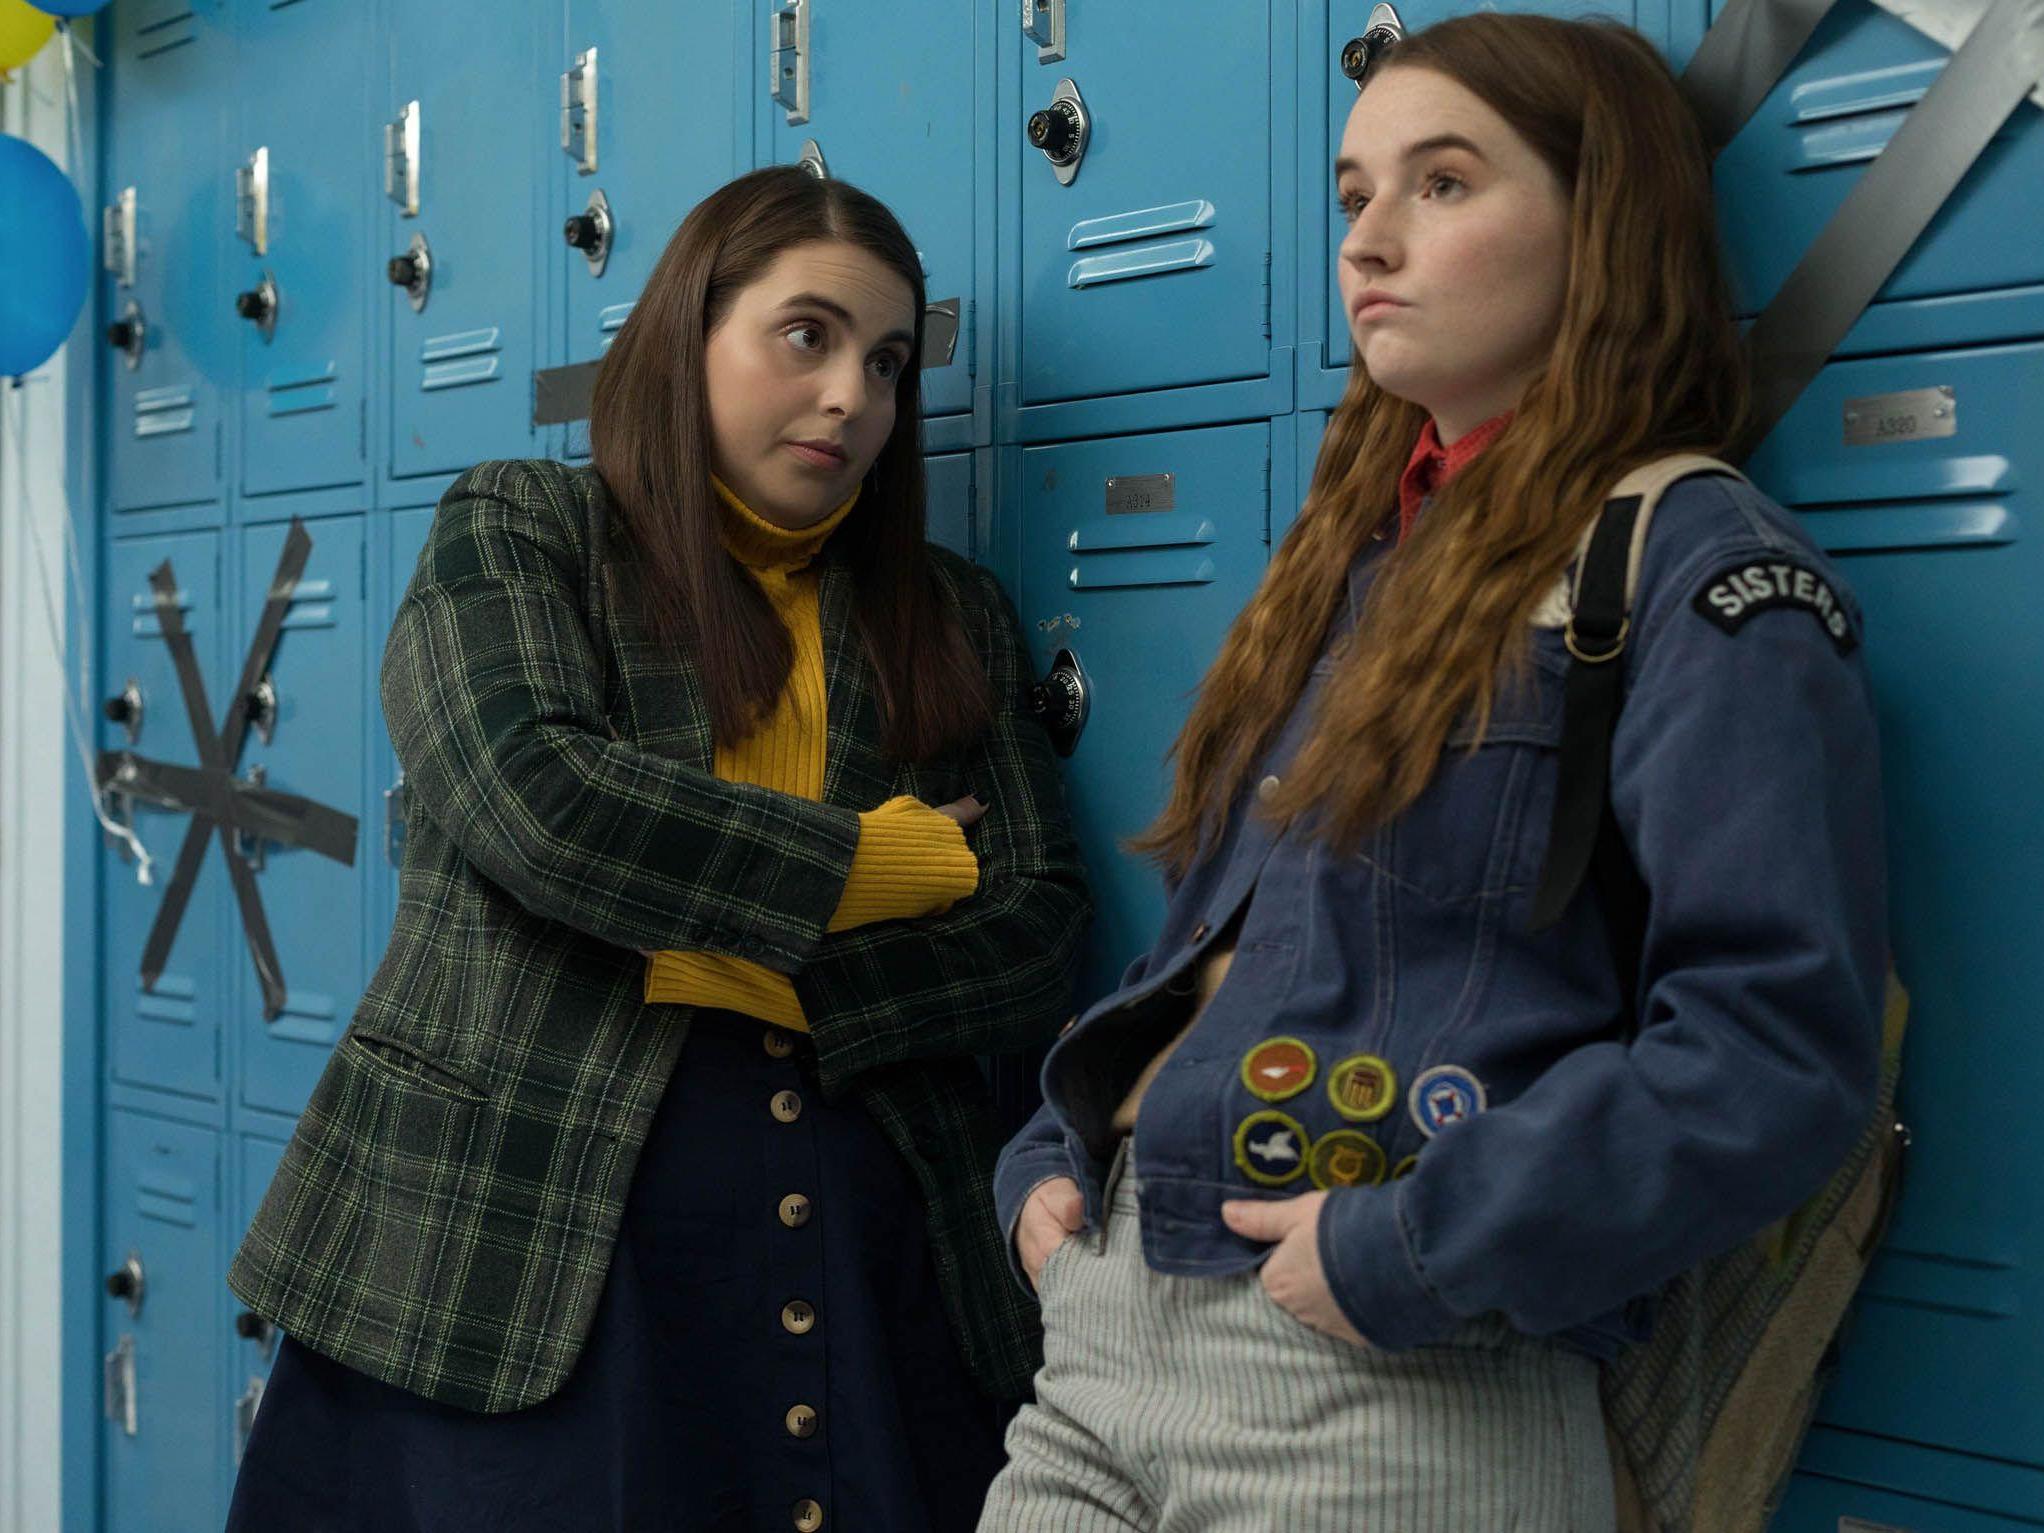 ‘Booksmart’ was acclaimed but didn’t fare so well at the box office